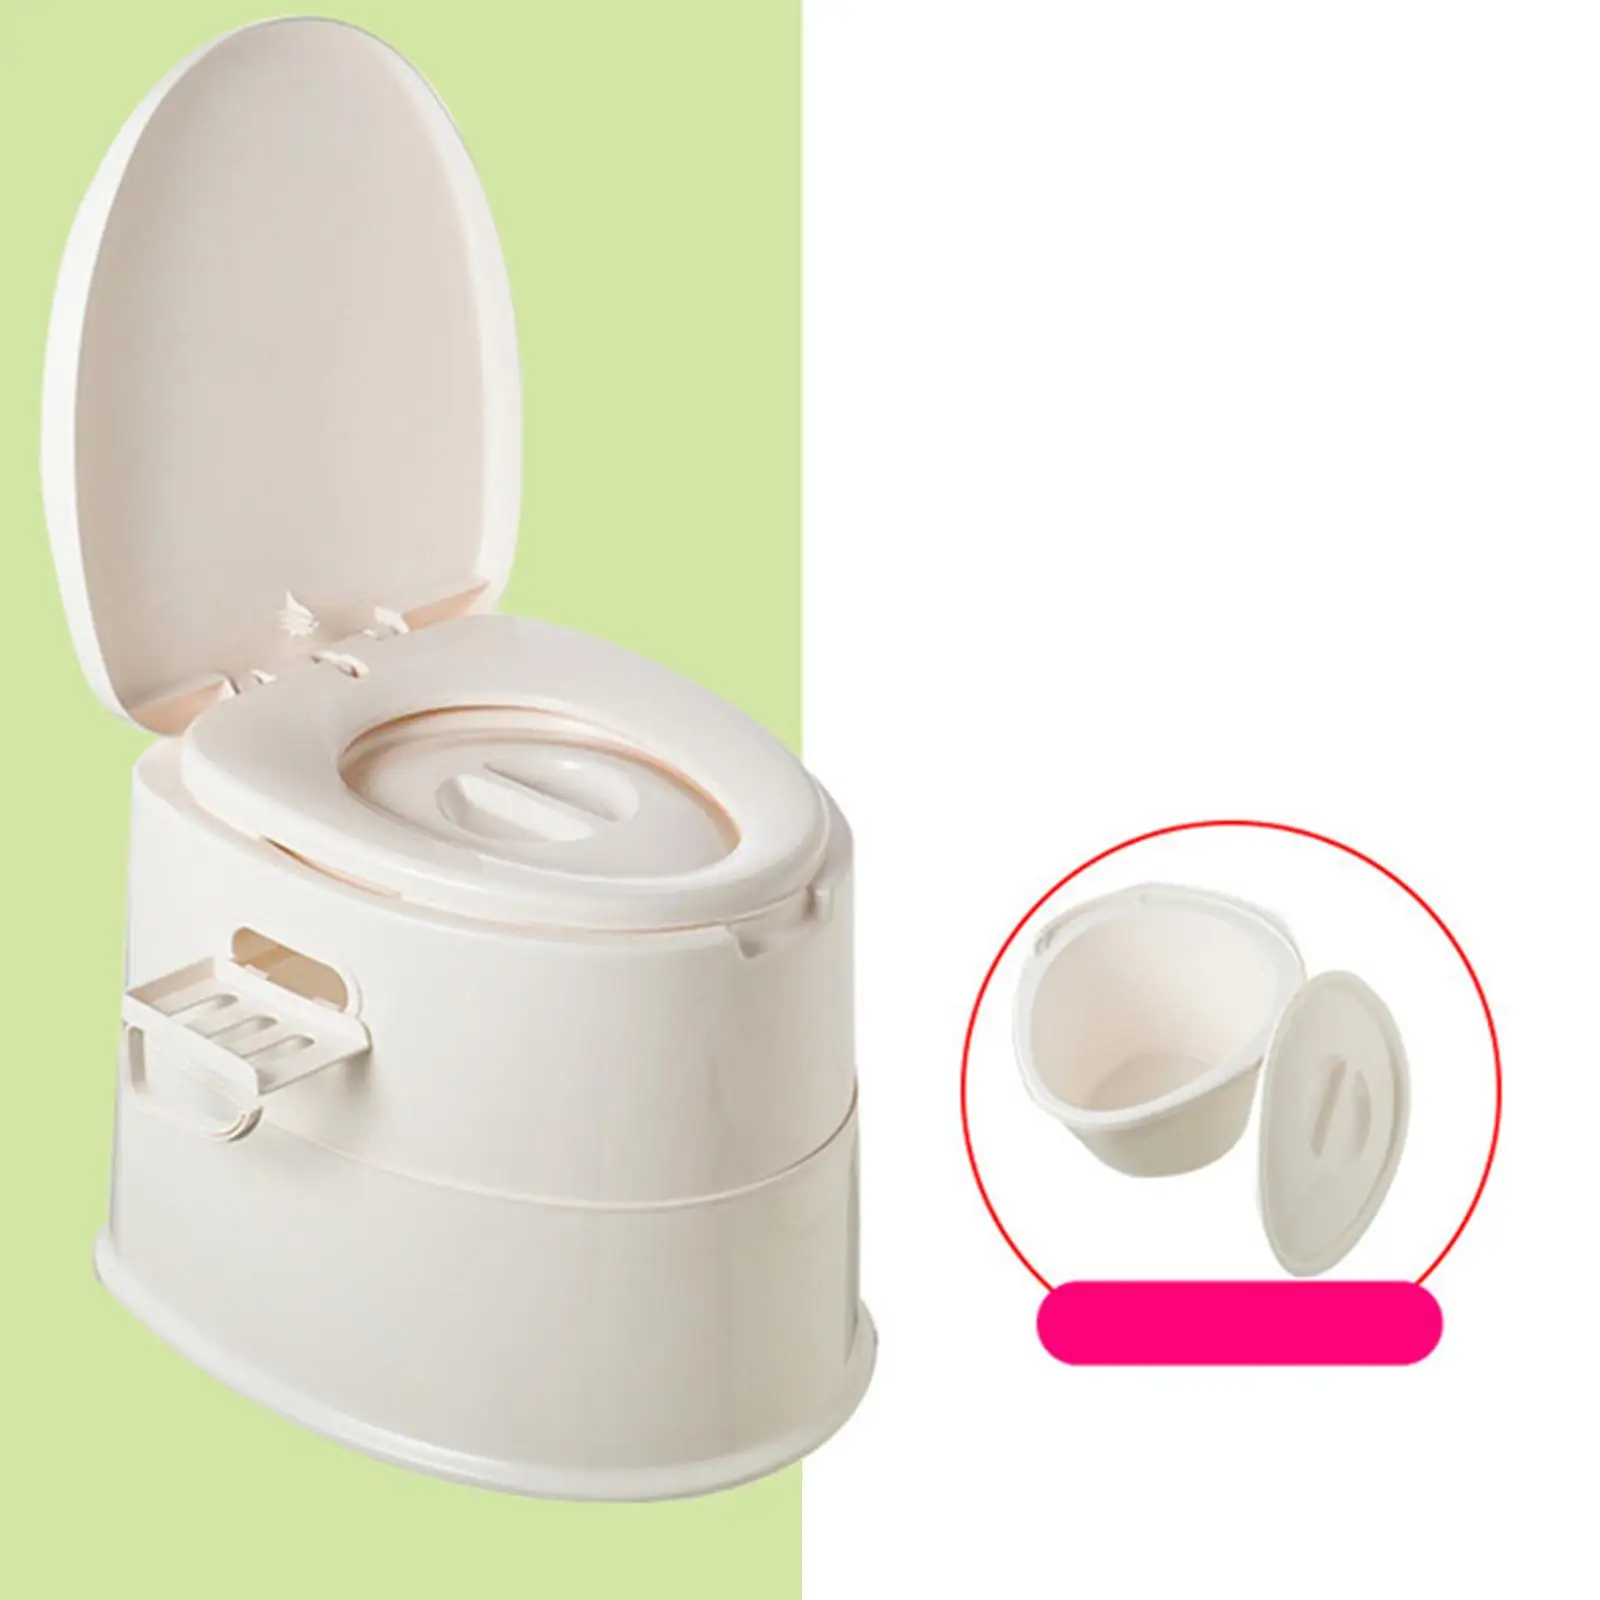 Portable Toilet for Adults Lightweight Sturdy Detachable Inner Bucket Outdoor Potty for Hiking Camping Boat Travel Indoor